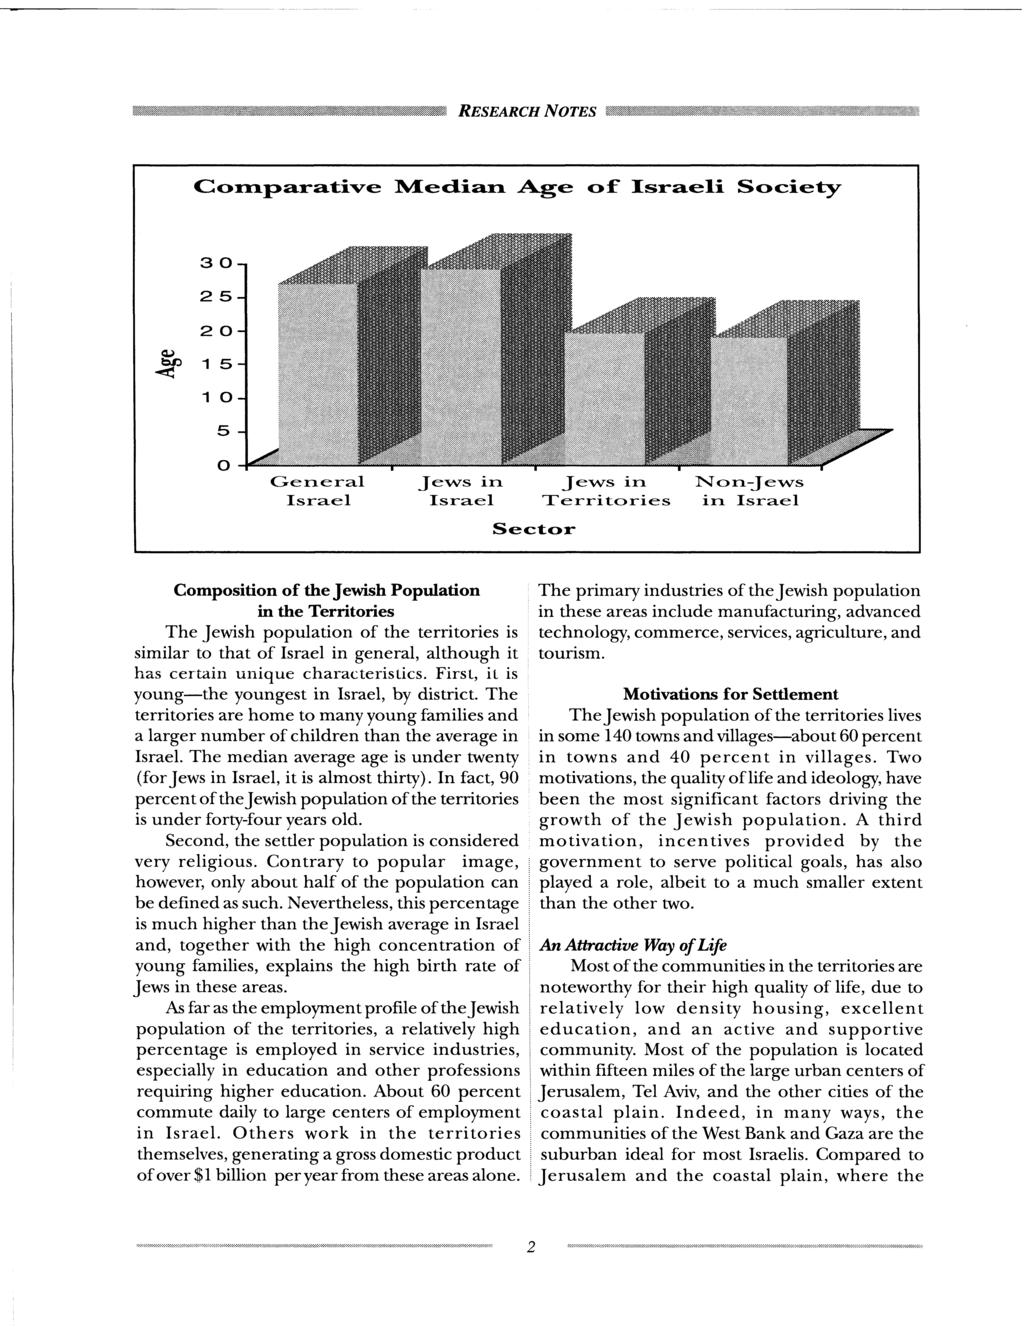 RESEARCH NOTES Corn/parative IVIedian Age of Israeli Society 3 O-i 25-2 O- QJ *p 1 5A 1 O- 5 - General Israel Jews in Israel Jews in Non-Jews in Israel Sector Composition of the Jewish Population in